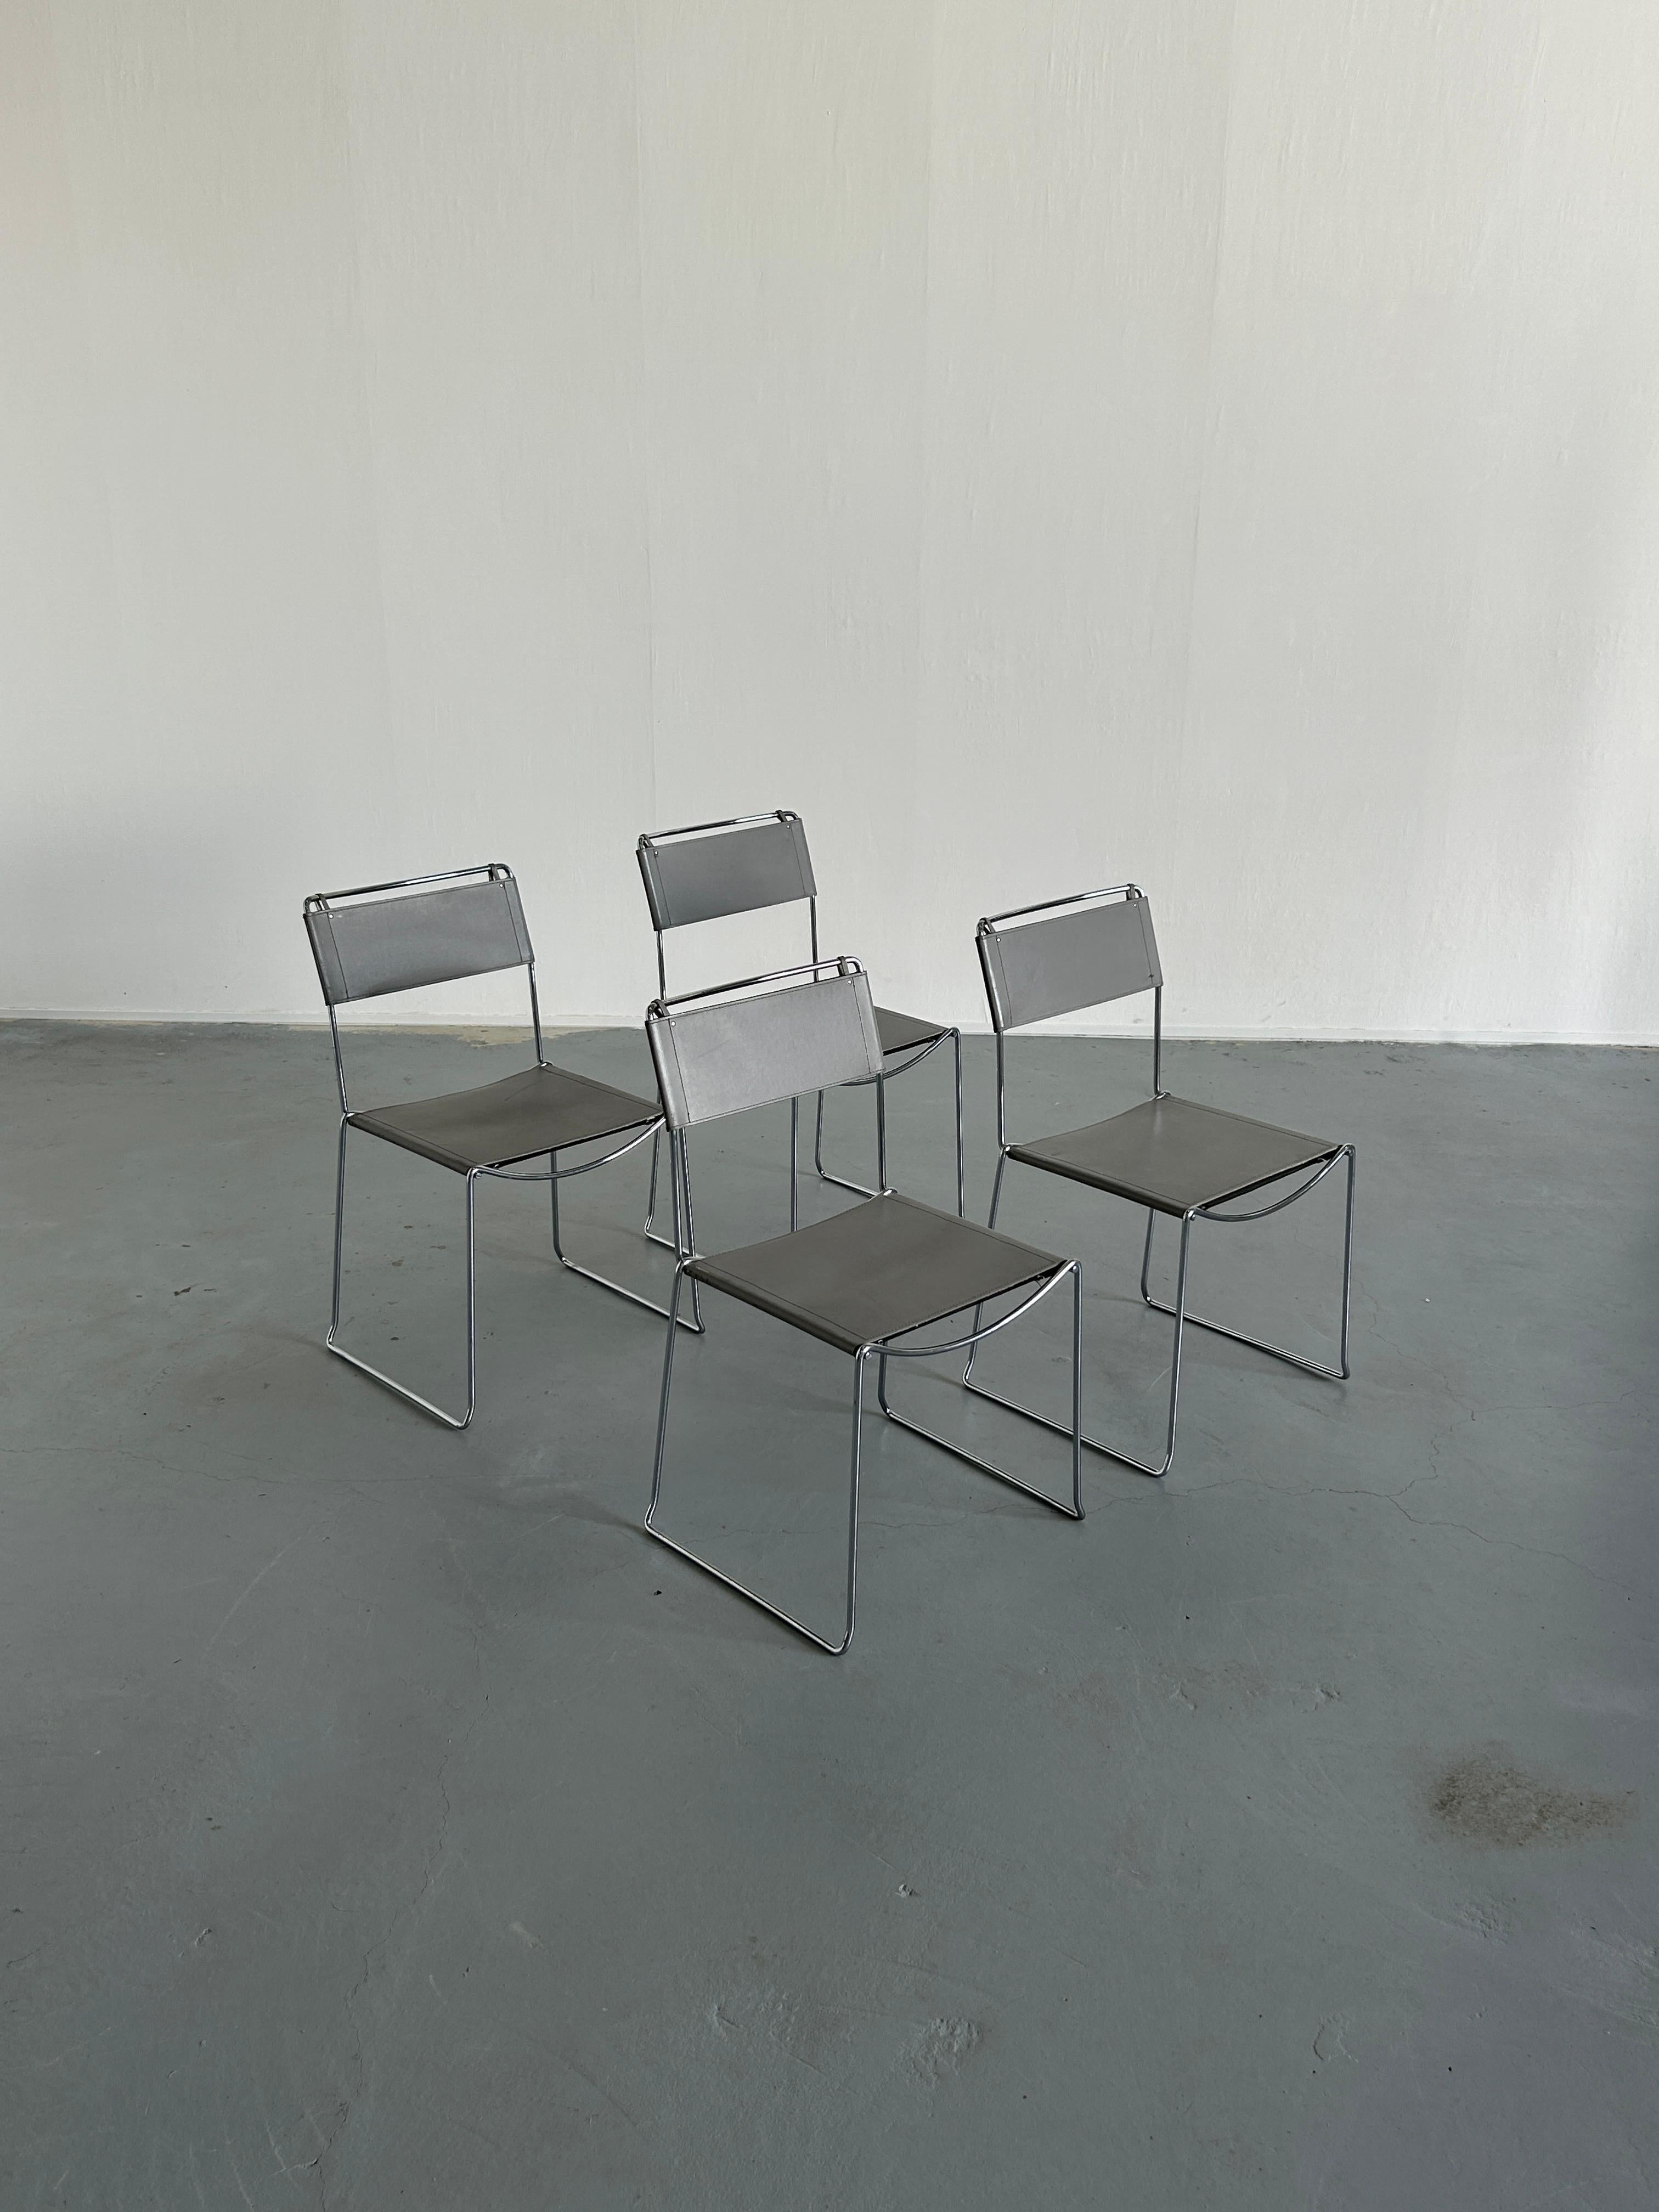 Set of four vintage Italian chrome and leather dining chairs by Giandomenico Belotti for Alias, 1980s Italy.

Chrome metal structure, grey leather backs and seating.
Seat and backrest made from double thick leather with cardboard reinforcement, seat